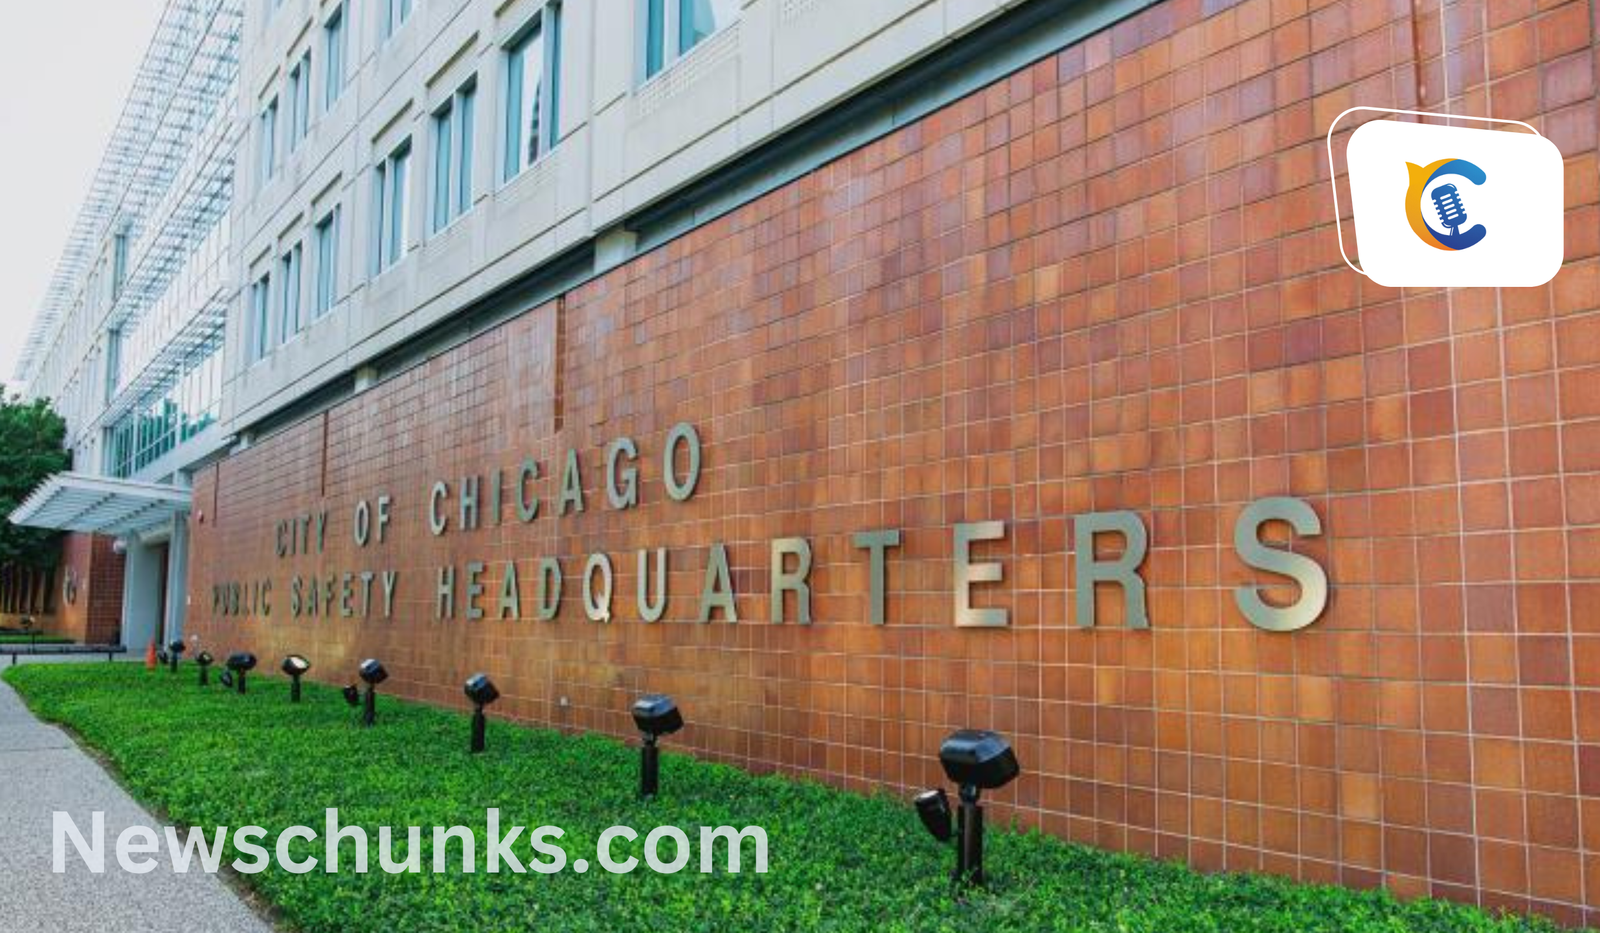 Chicago taxpayers: $91.3M lost over 3 years due to repeated misconduct by 116 police officers